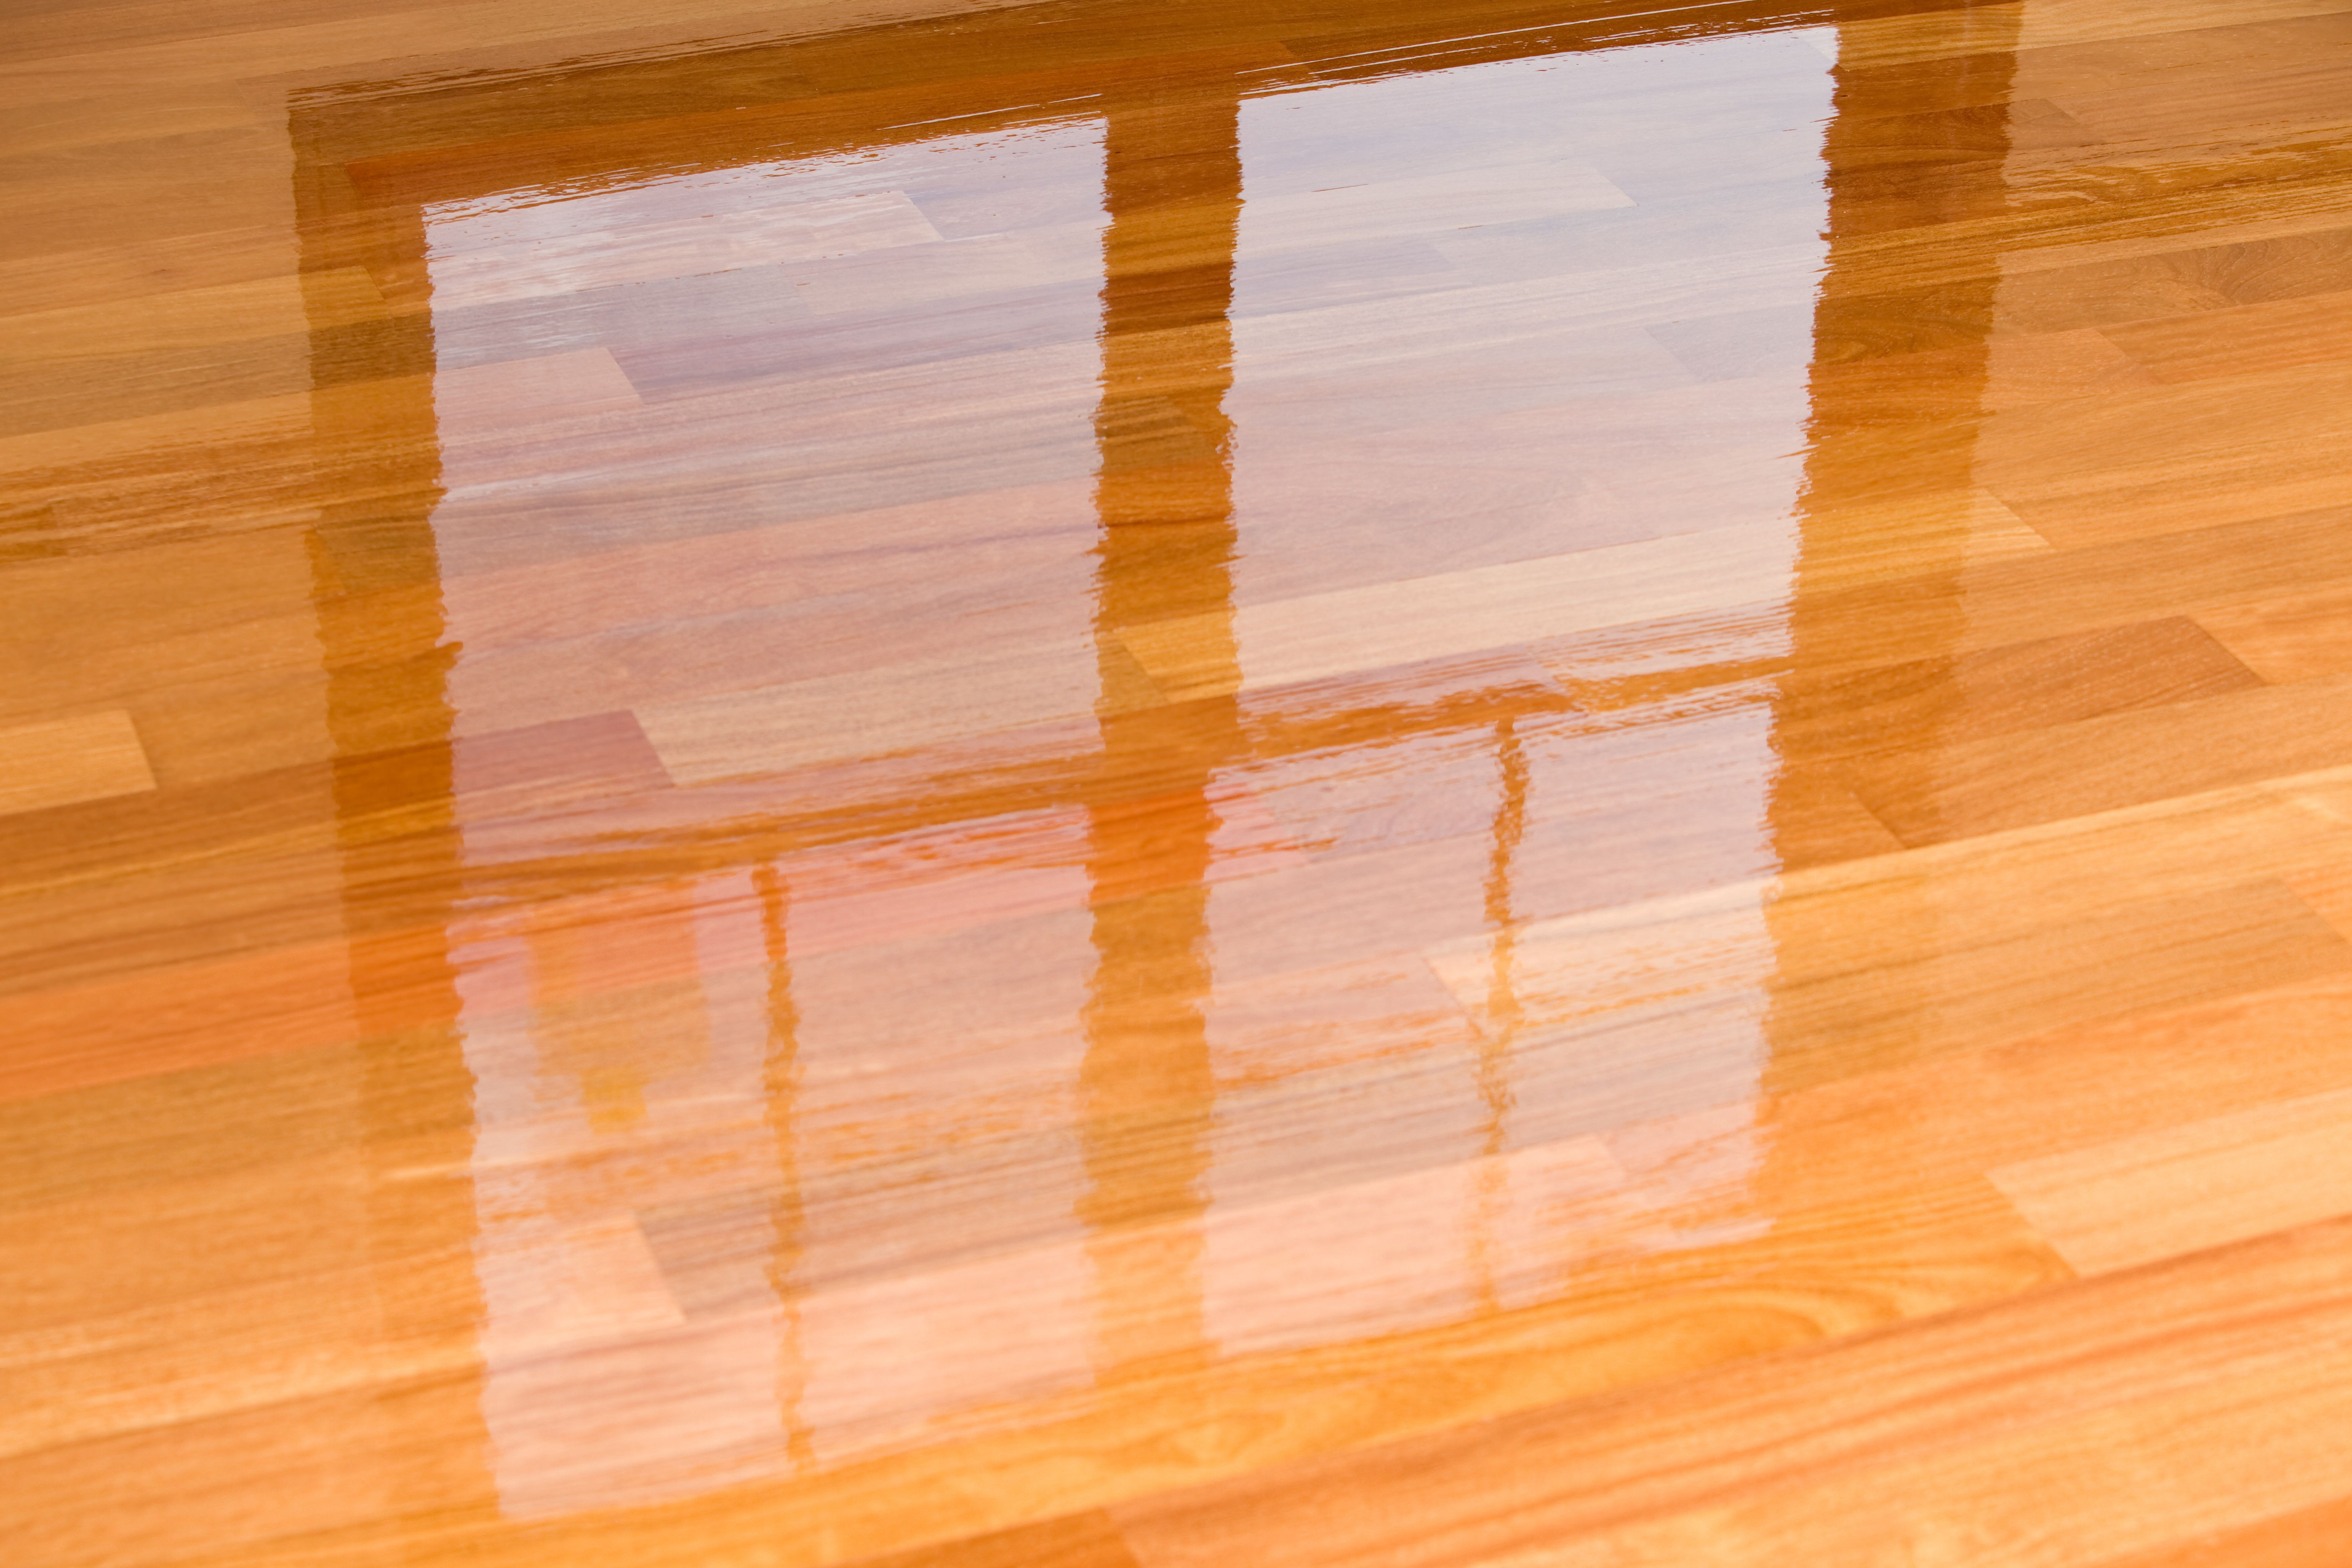 Hardwood Floor Refinishing Winnipeg Of Guide to Laminate Flooring Water and Damage Repair with Wet Polyurethane On New Hardwood Floor with Window Reflection 183846705 582e34da3df78c6f6a403968